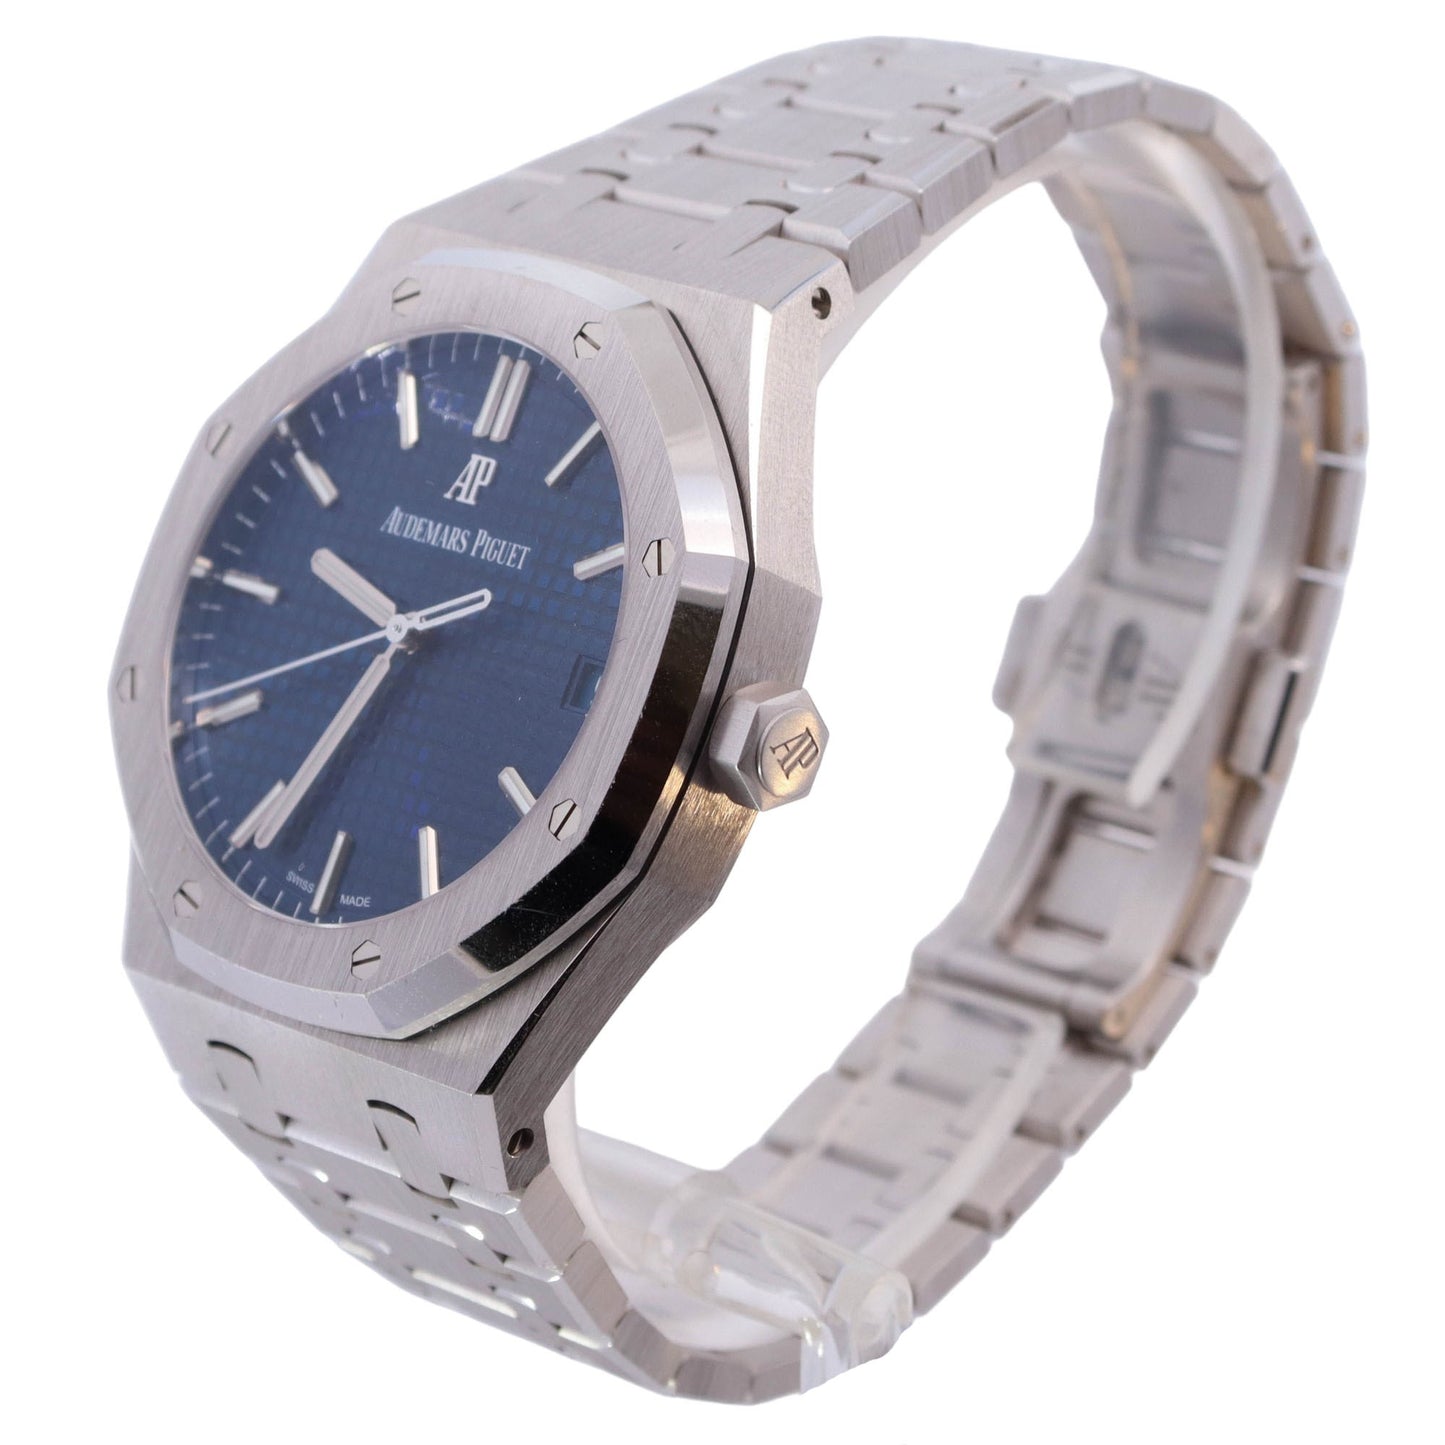 Audemars Piguet Royal Oak "Japan Edition" White Gold 41mm Blue Stick Dial Watch Reference# 15503BC.OO.1220BC.01